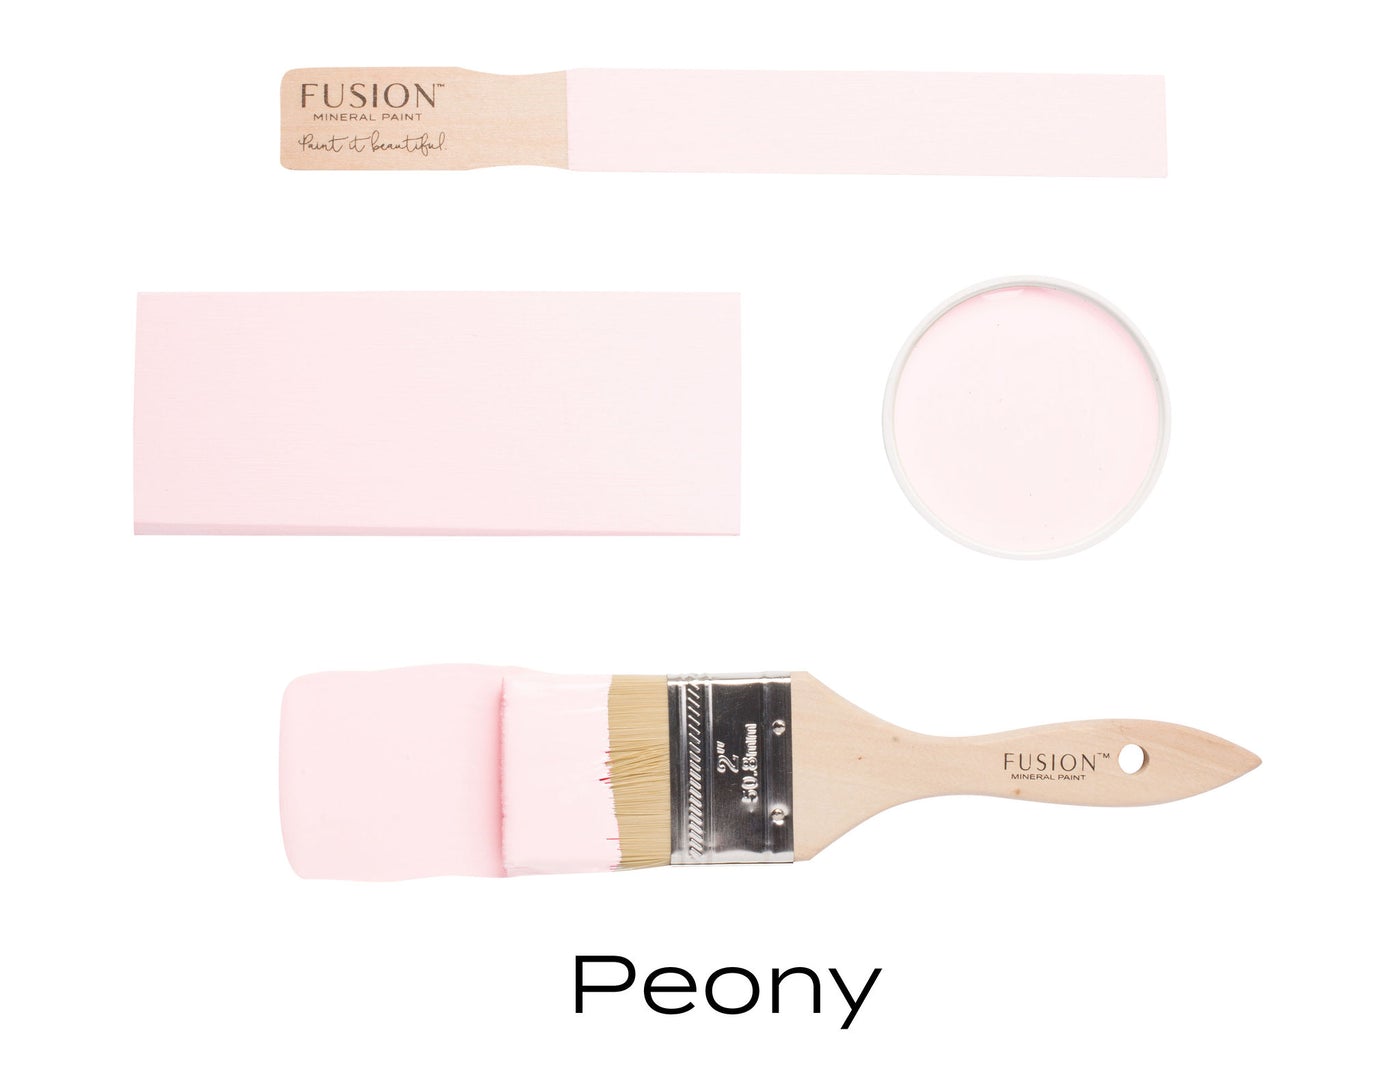 PEONY - FUSION MINERAL PAINT